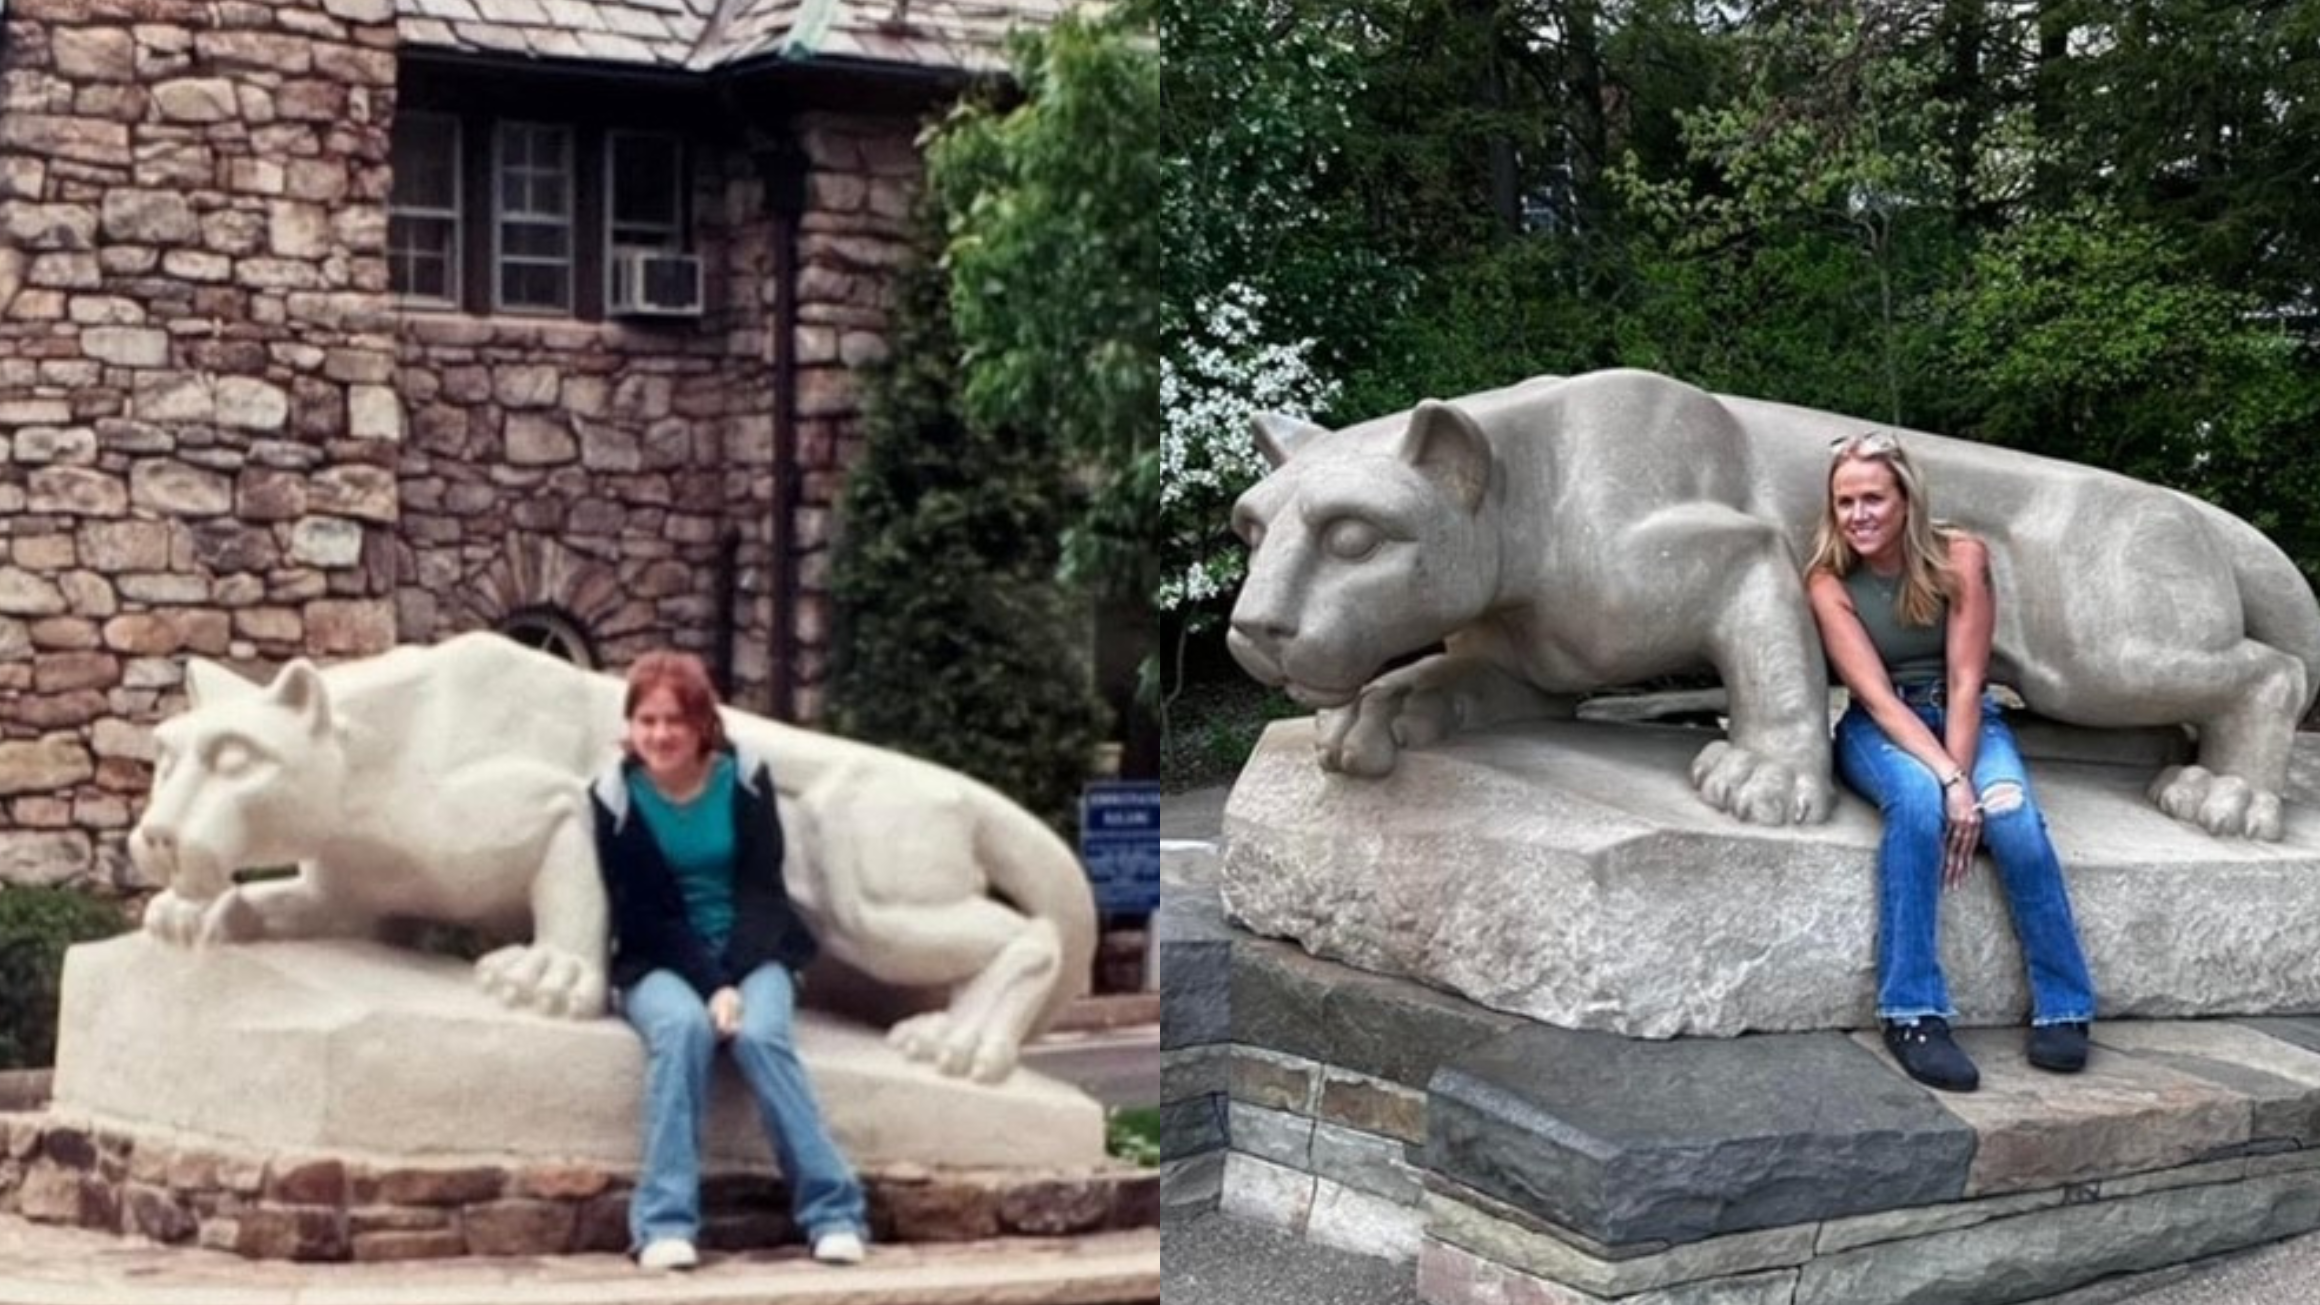 Two photos of a woman sitting with Nittany Lion sculptures.